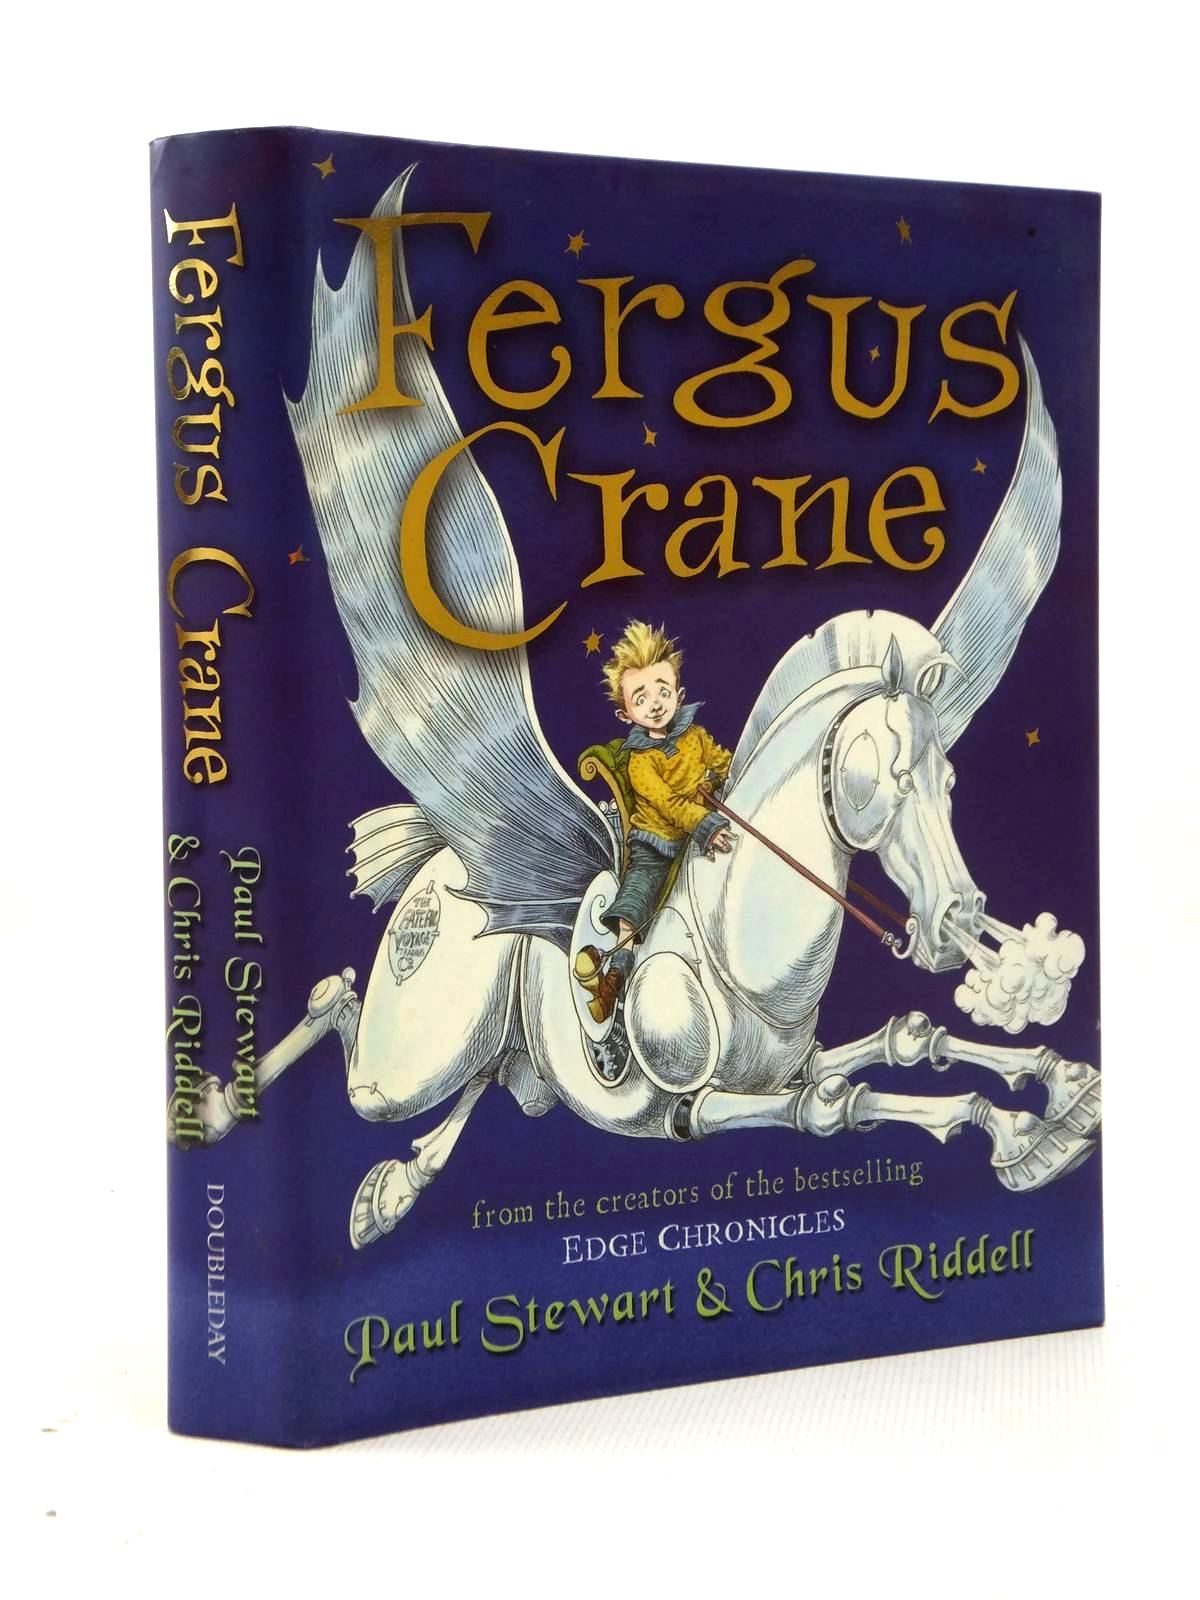 Photo of FERGUS CRANE written by Stewart, Paul illustrated by Riddell, Chris published by Doubleday (STOCK CODE: 1208833)  for sale by Stella & Rose's Books